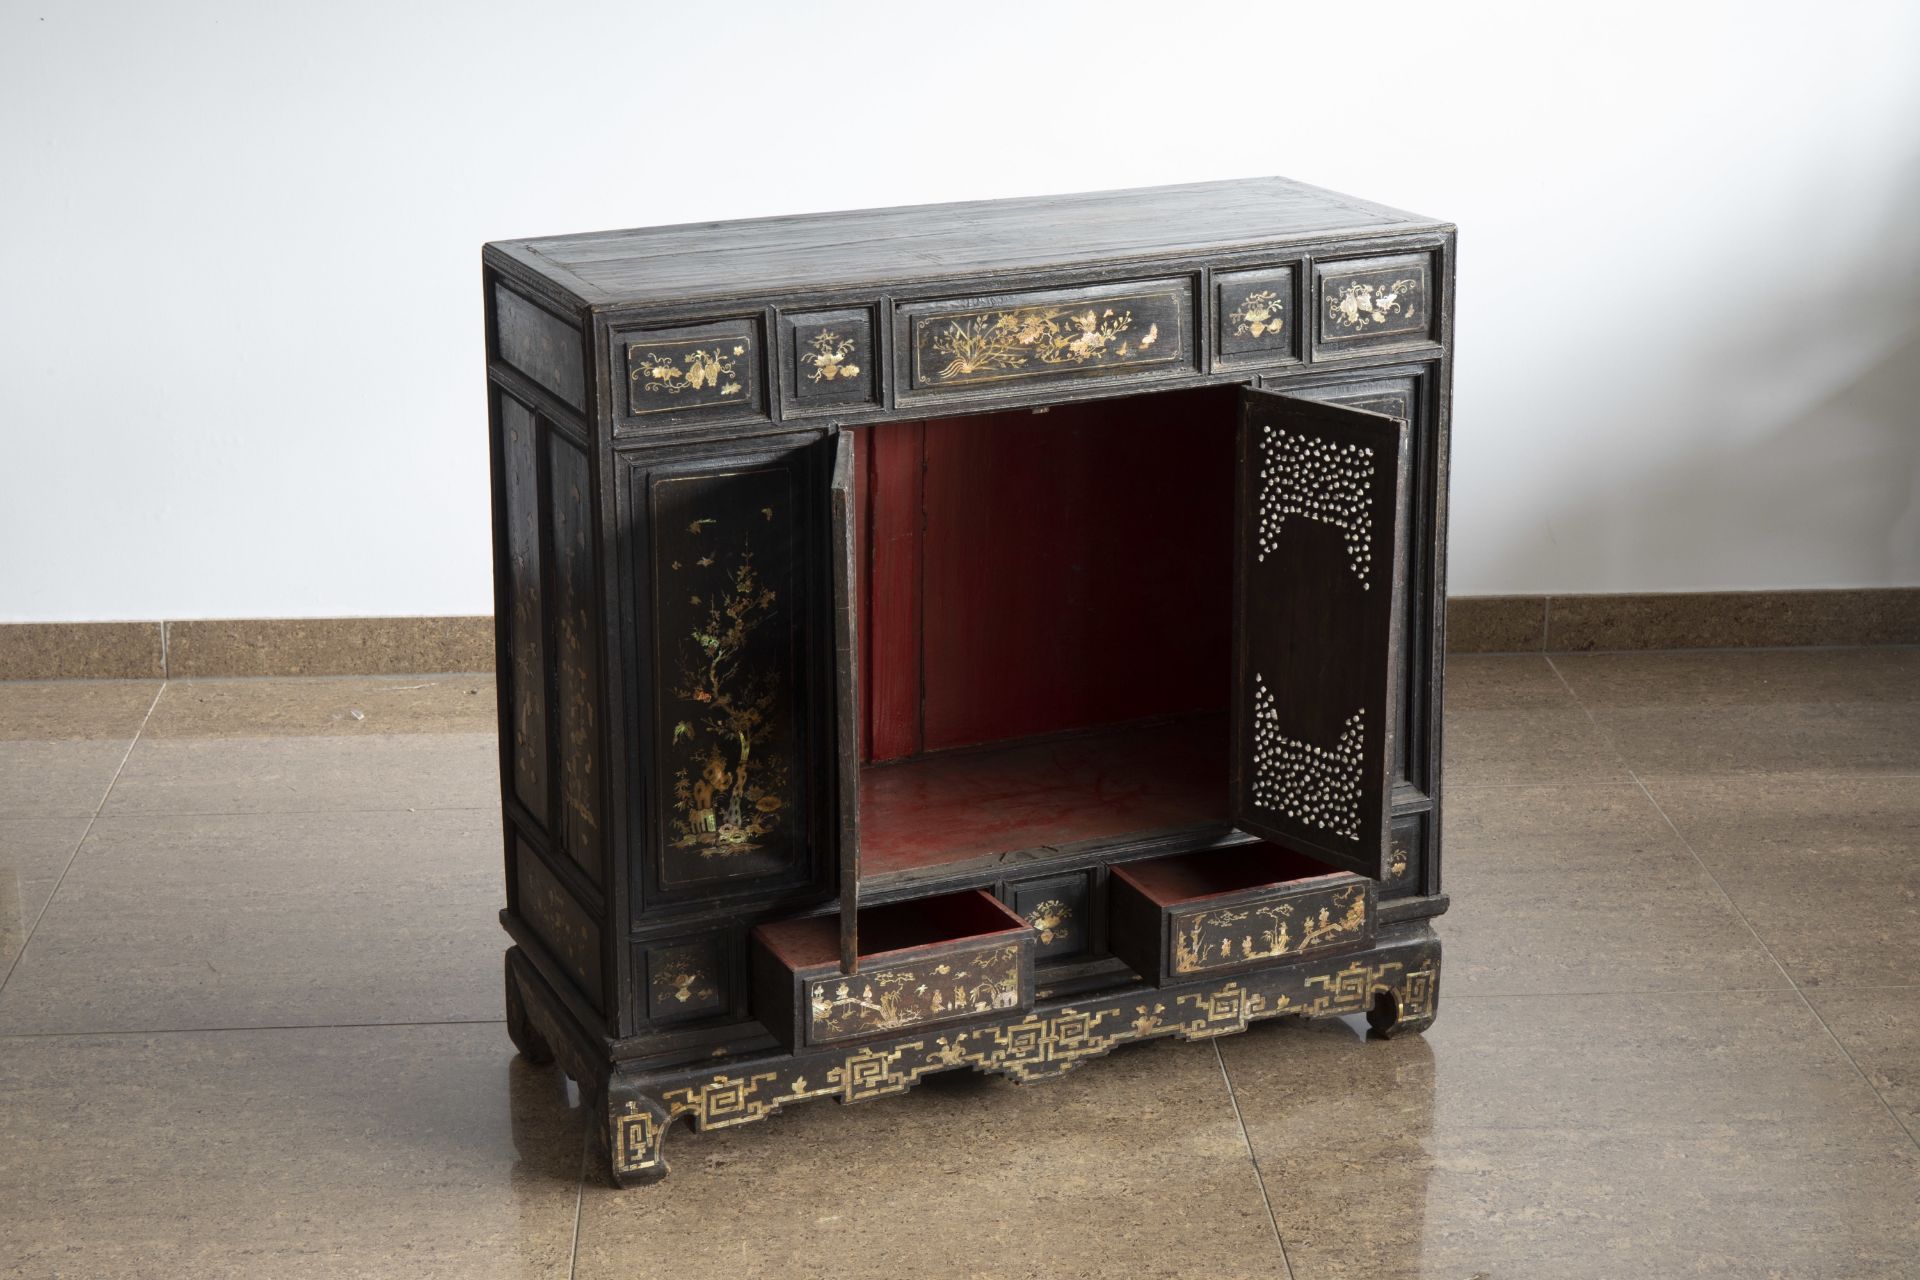 A Vietnamese mother-of-pearl inlaid wood two-door cabinet with figures in a palace garden and floral - Image 2 of 8